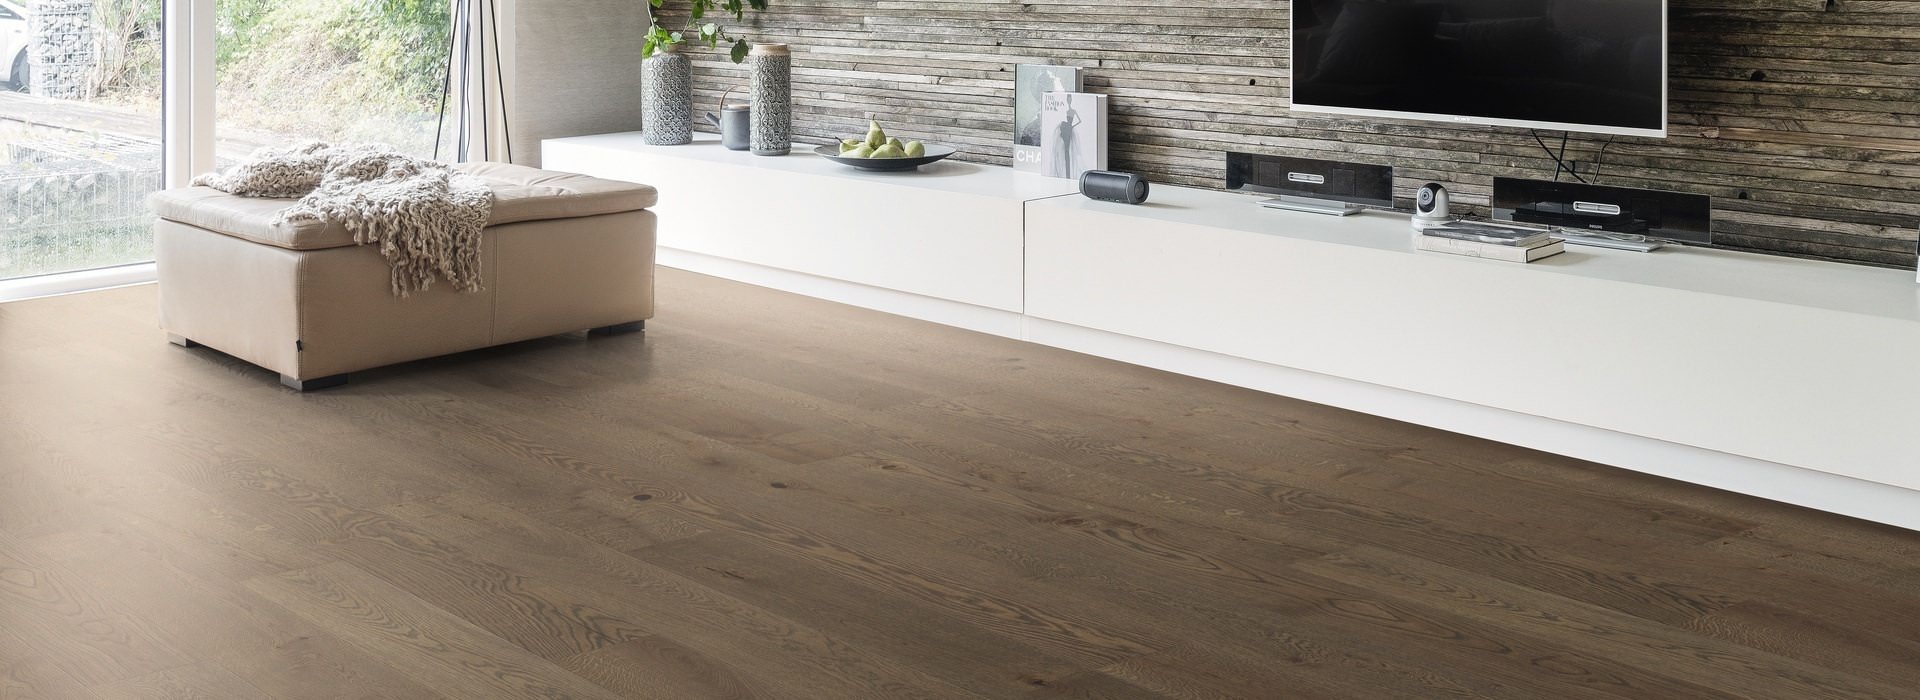 HARO PARQUET 4000 Plank 1-Strip 180 4V Oak Reed Brown Sauvage brushed naturaLin plus Top Connect